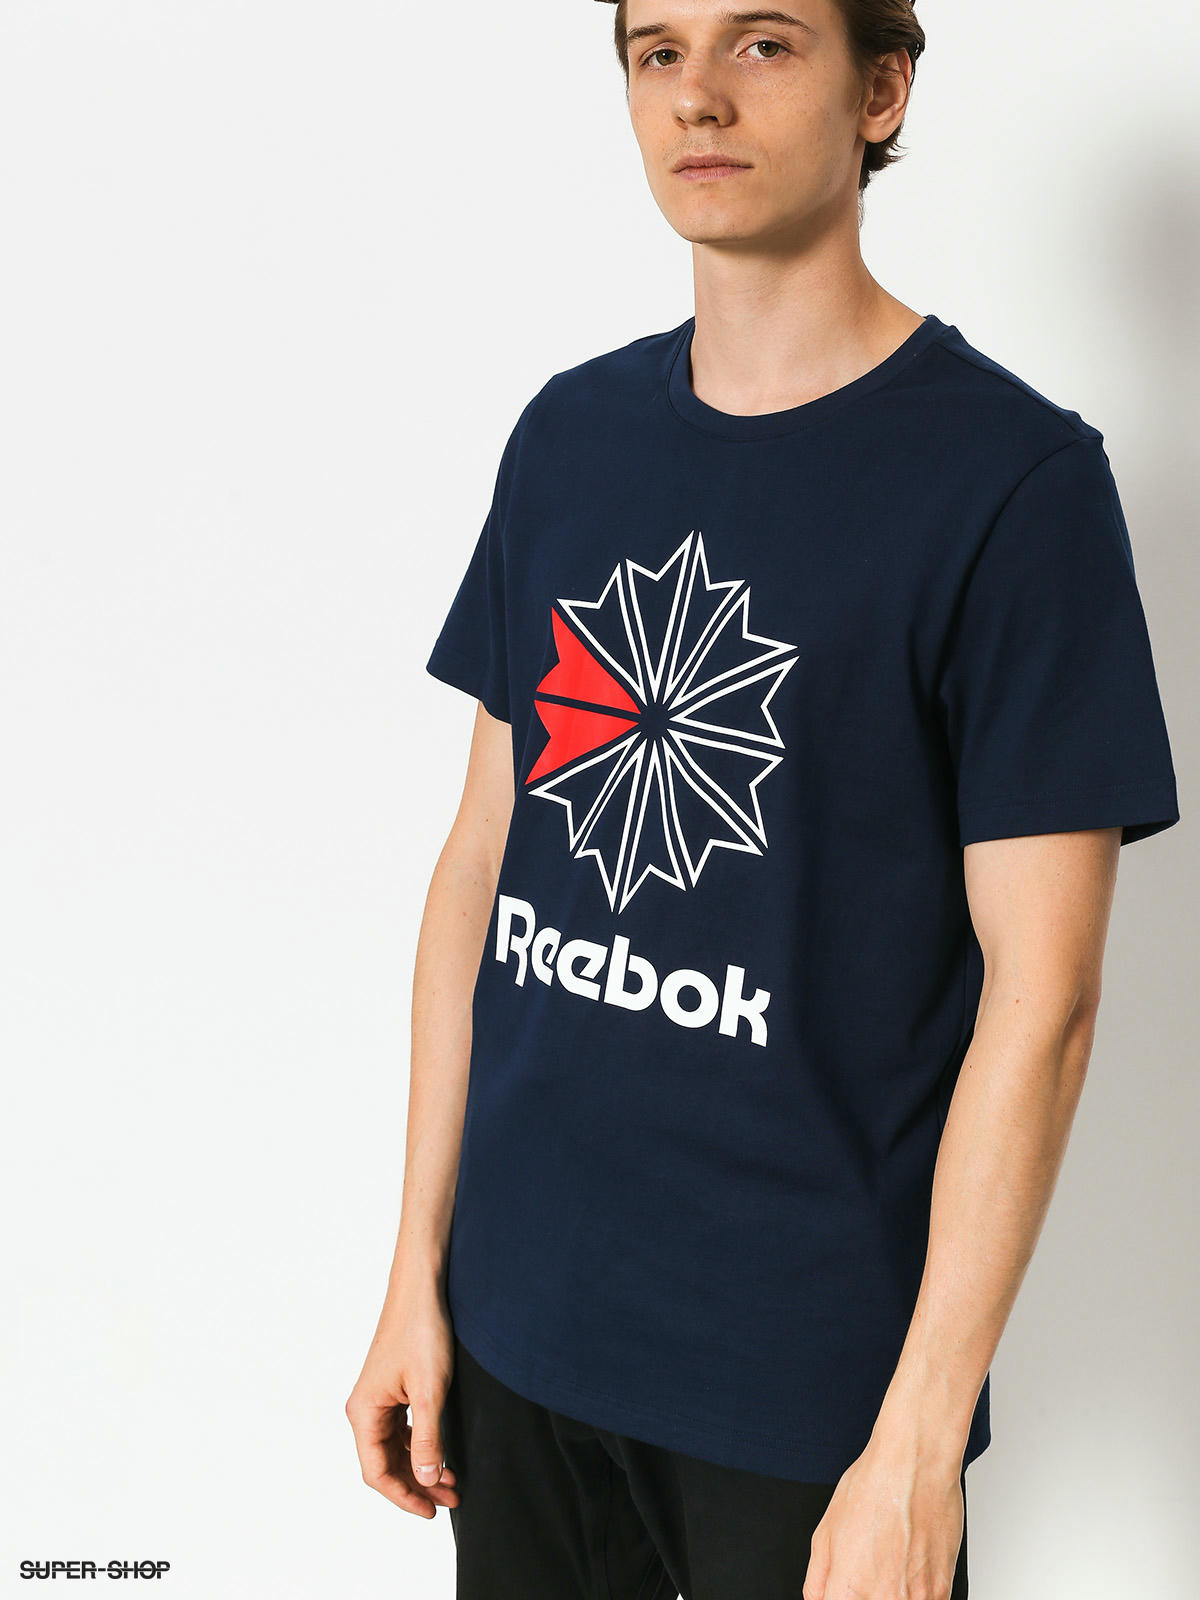 red white and blue reebok shirt